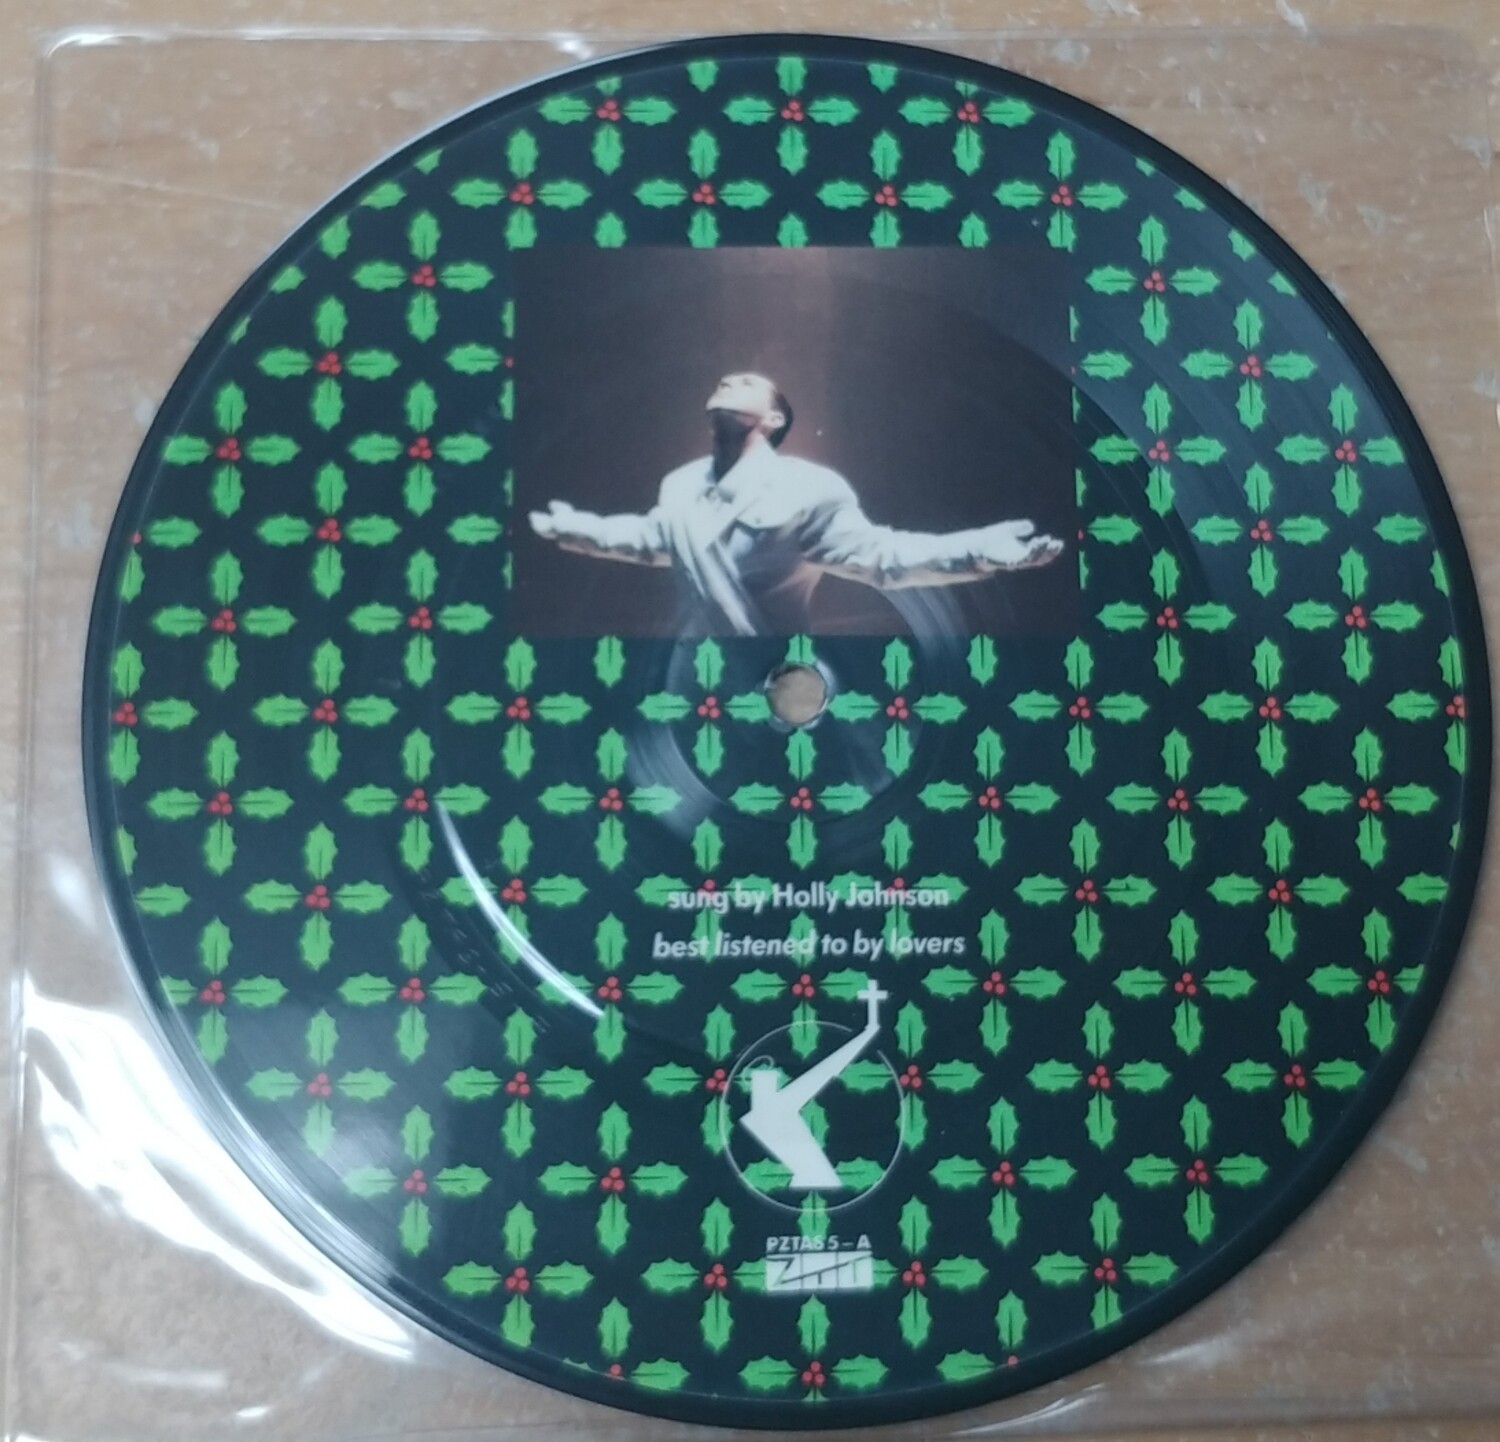 Frankie Goes To Hollywood - The power of love (7'' - PICTURE DISC)